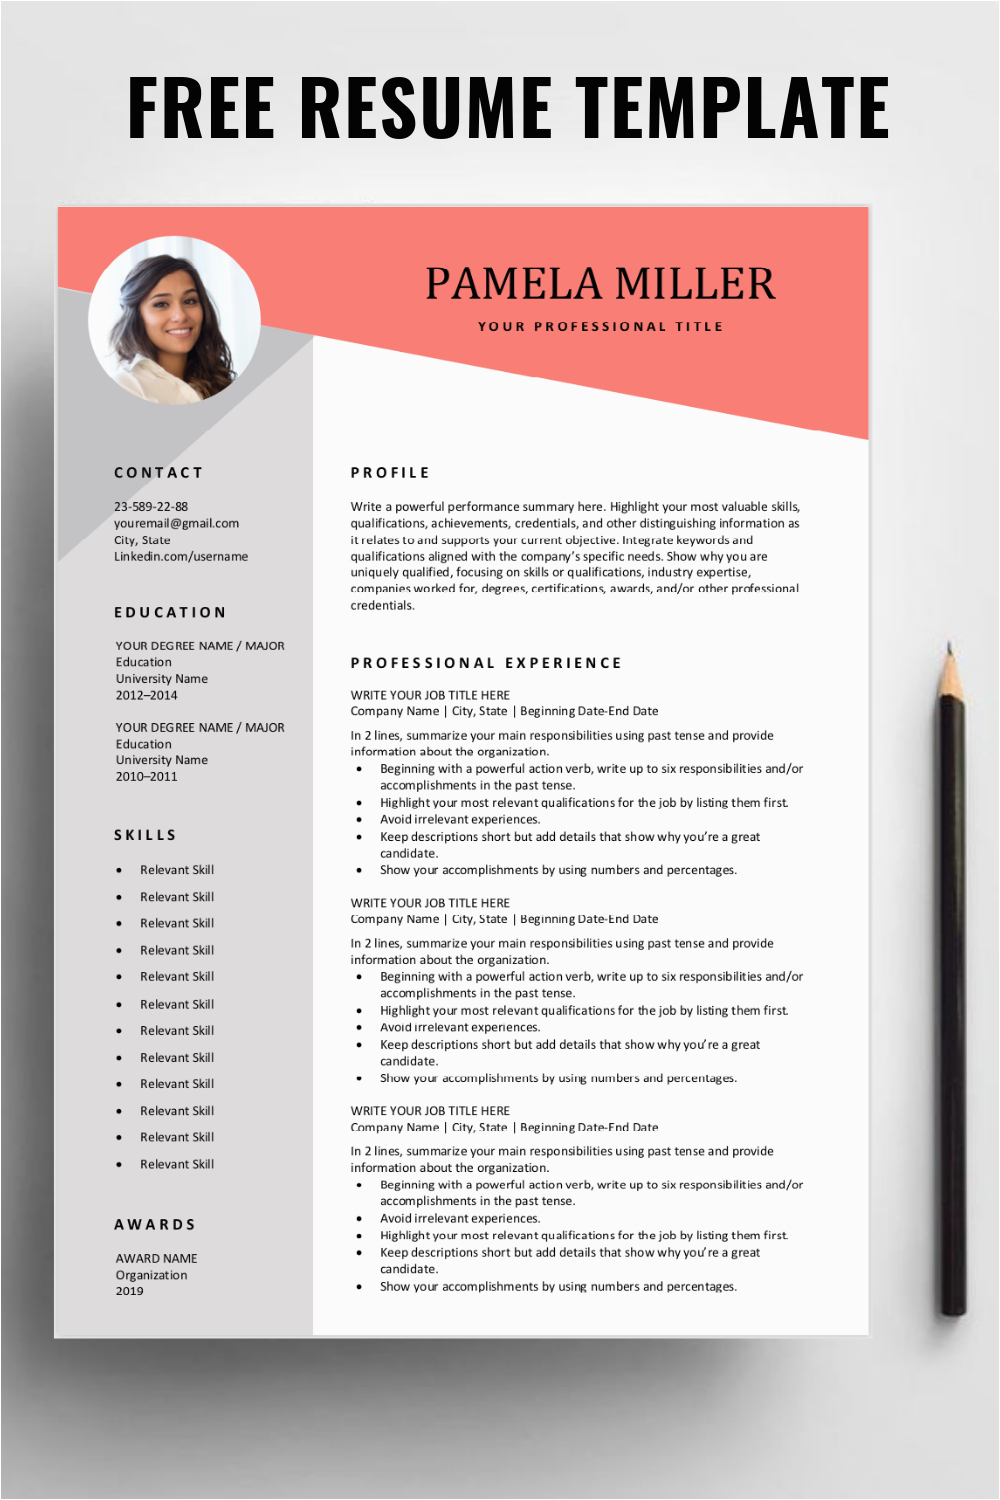 Resume and Cv Templates Free Download Free Resume Template